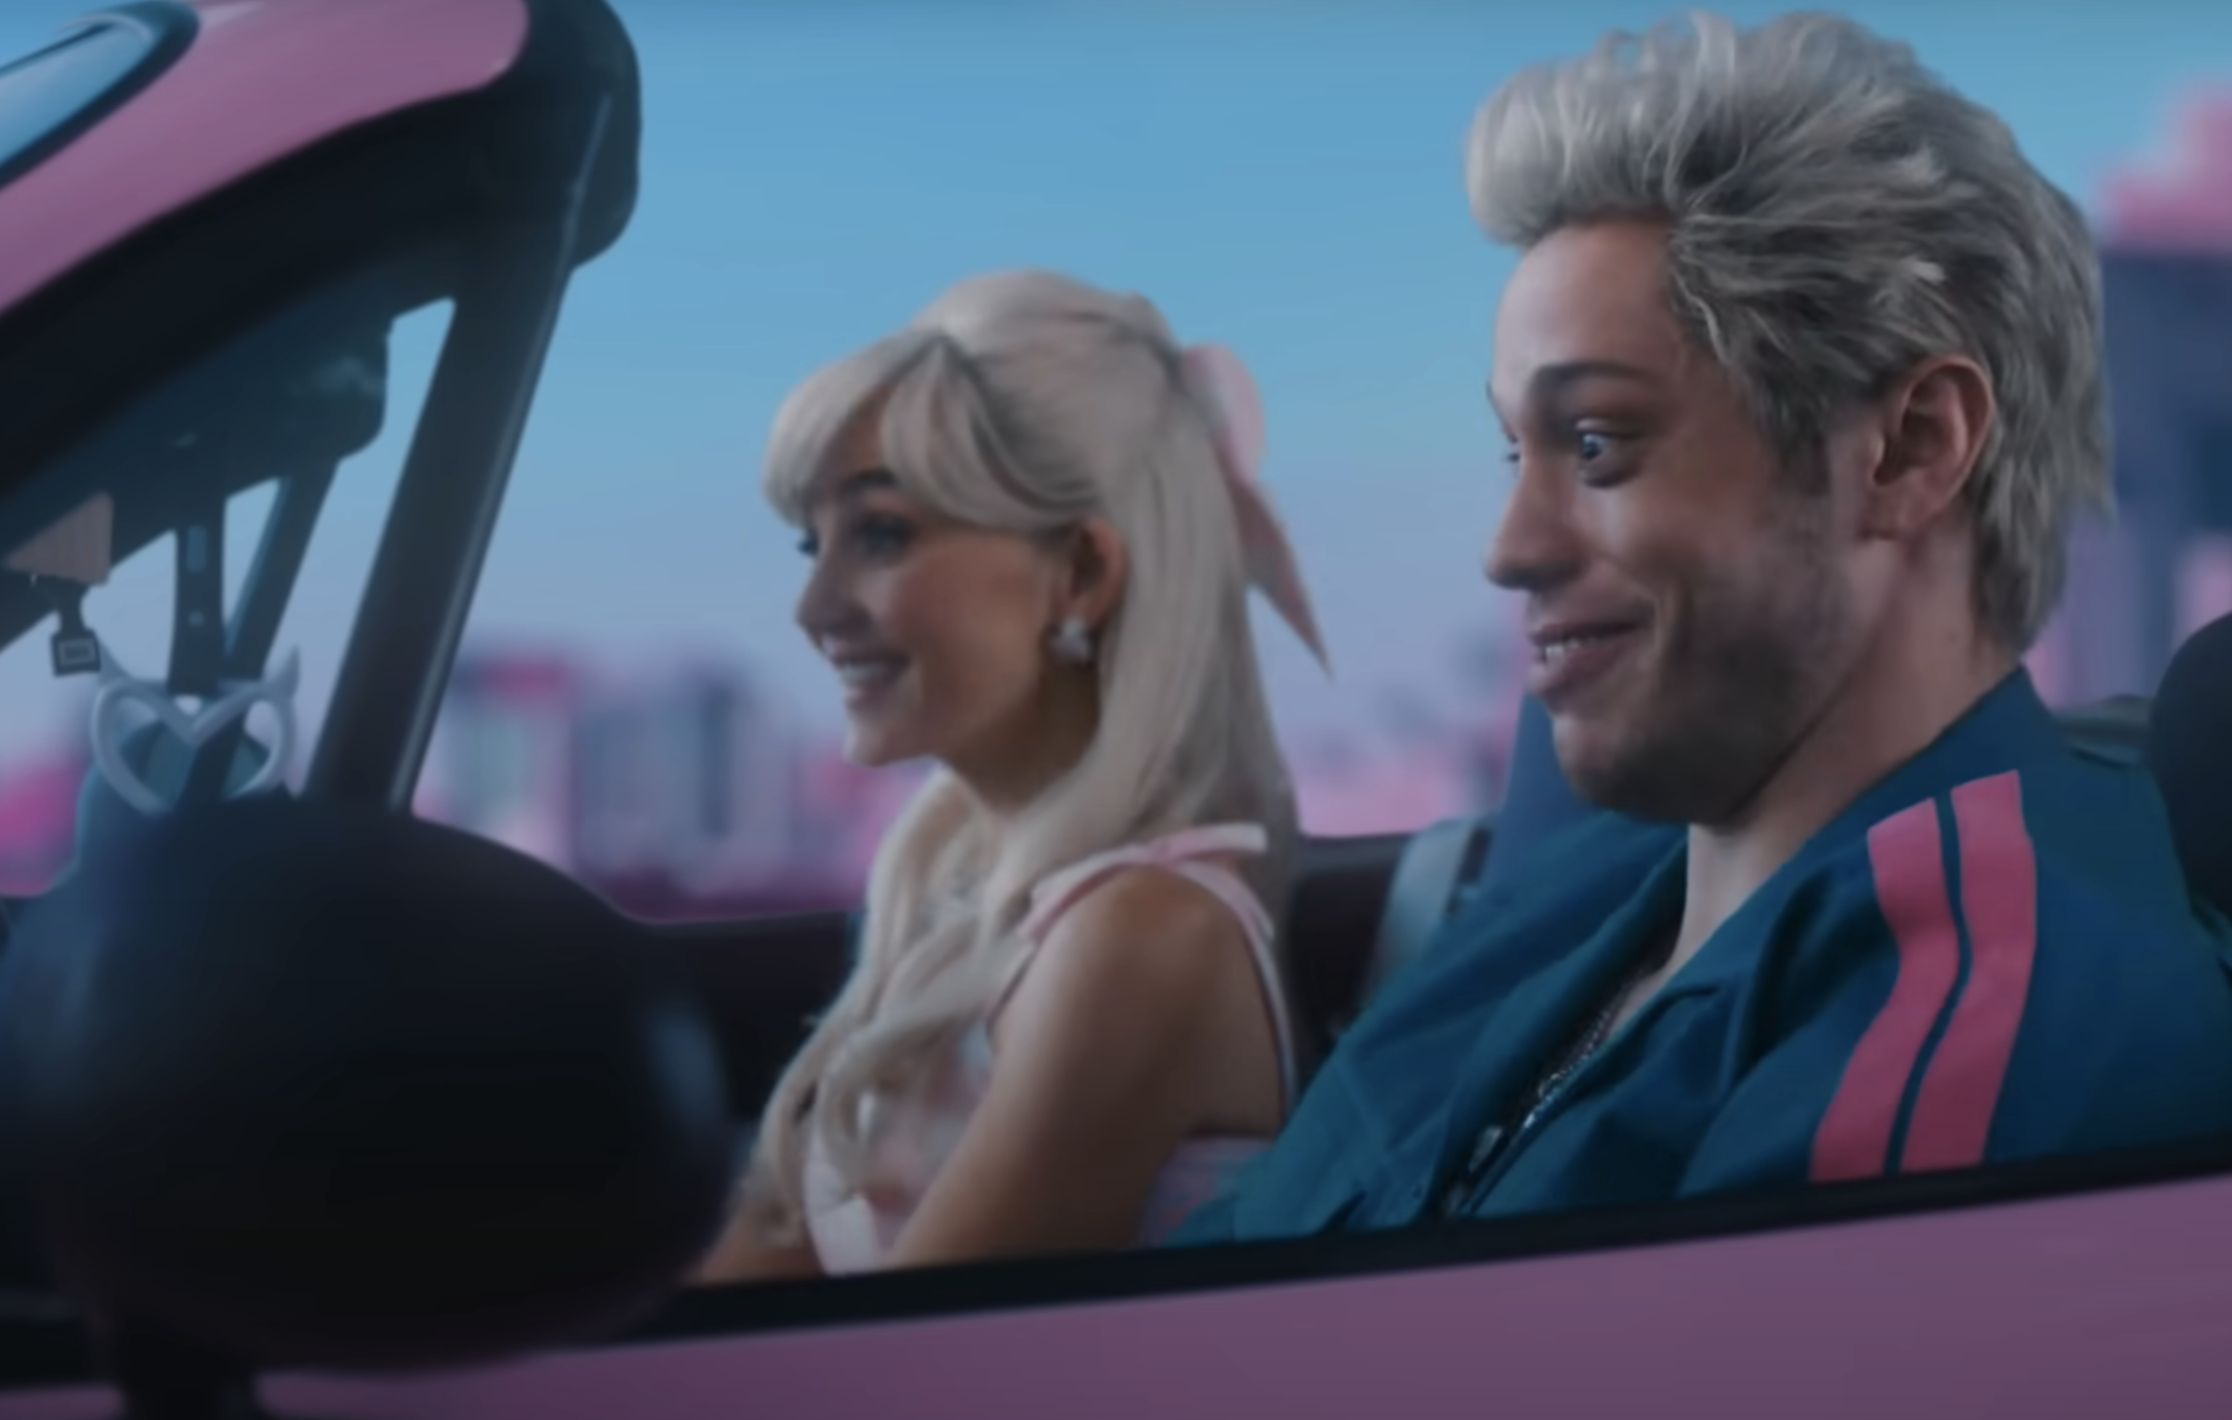 Close-up of Pete sitting in a car with a woman